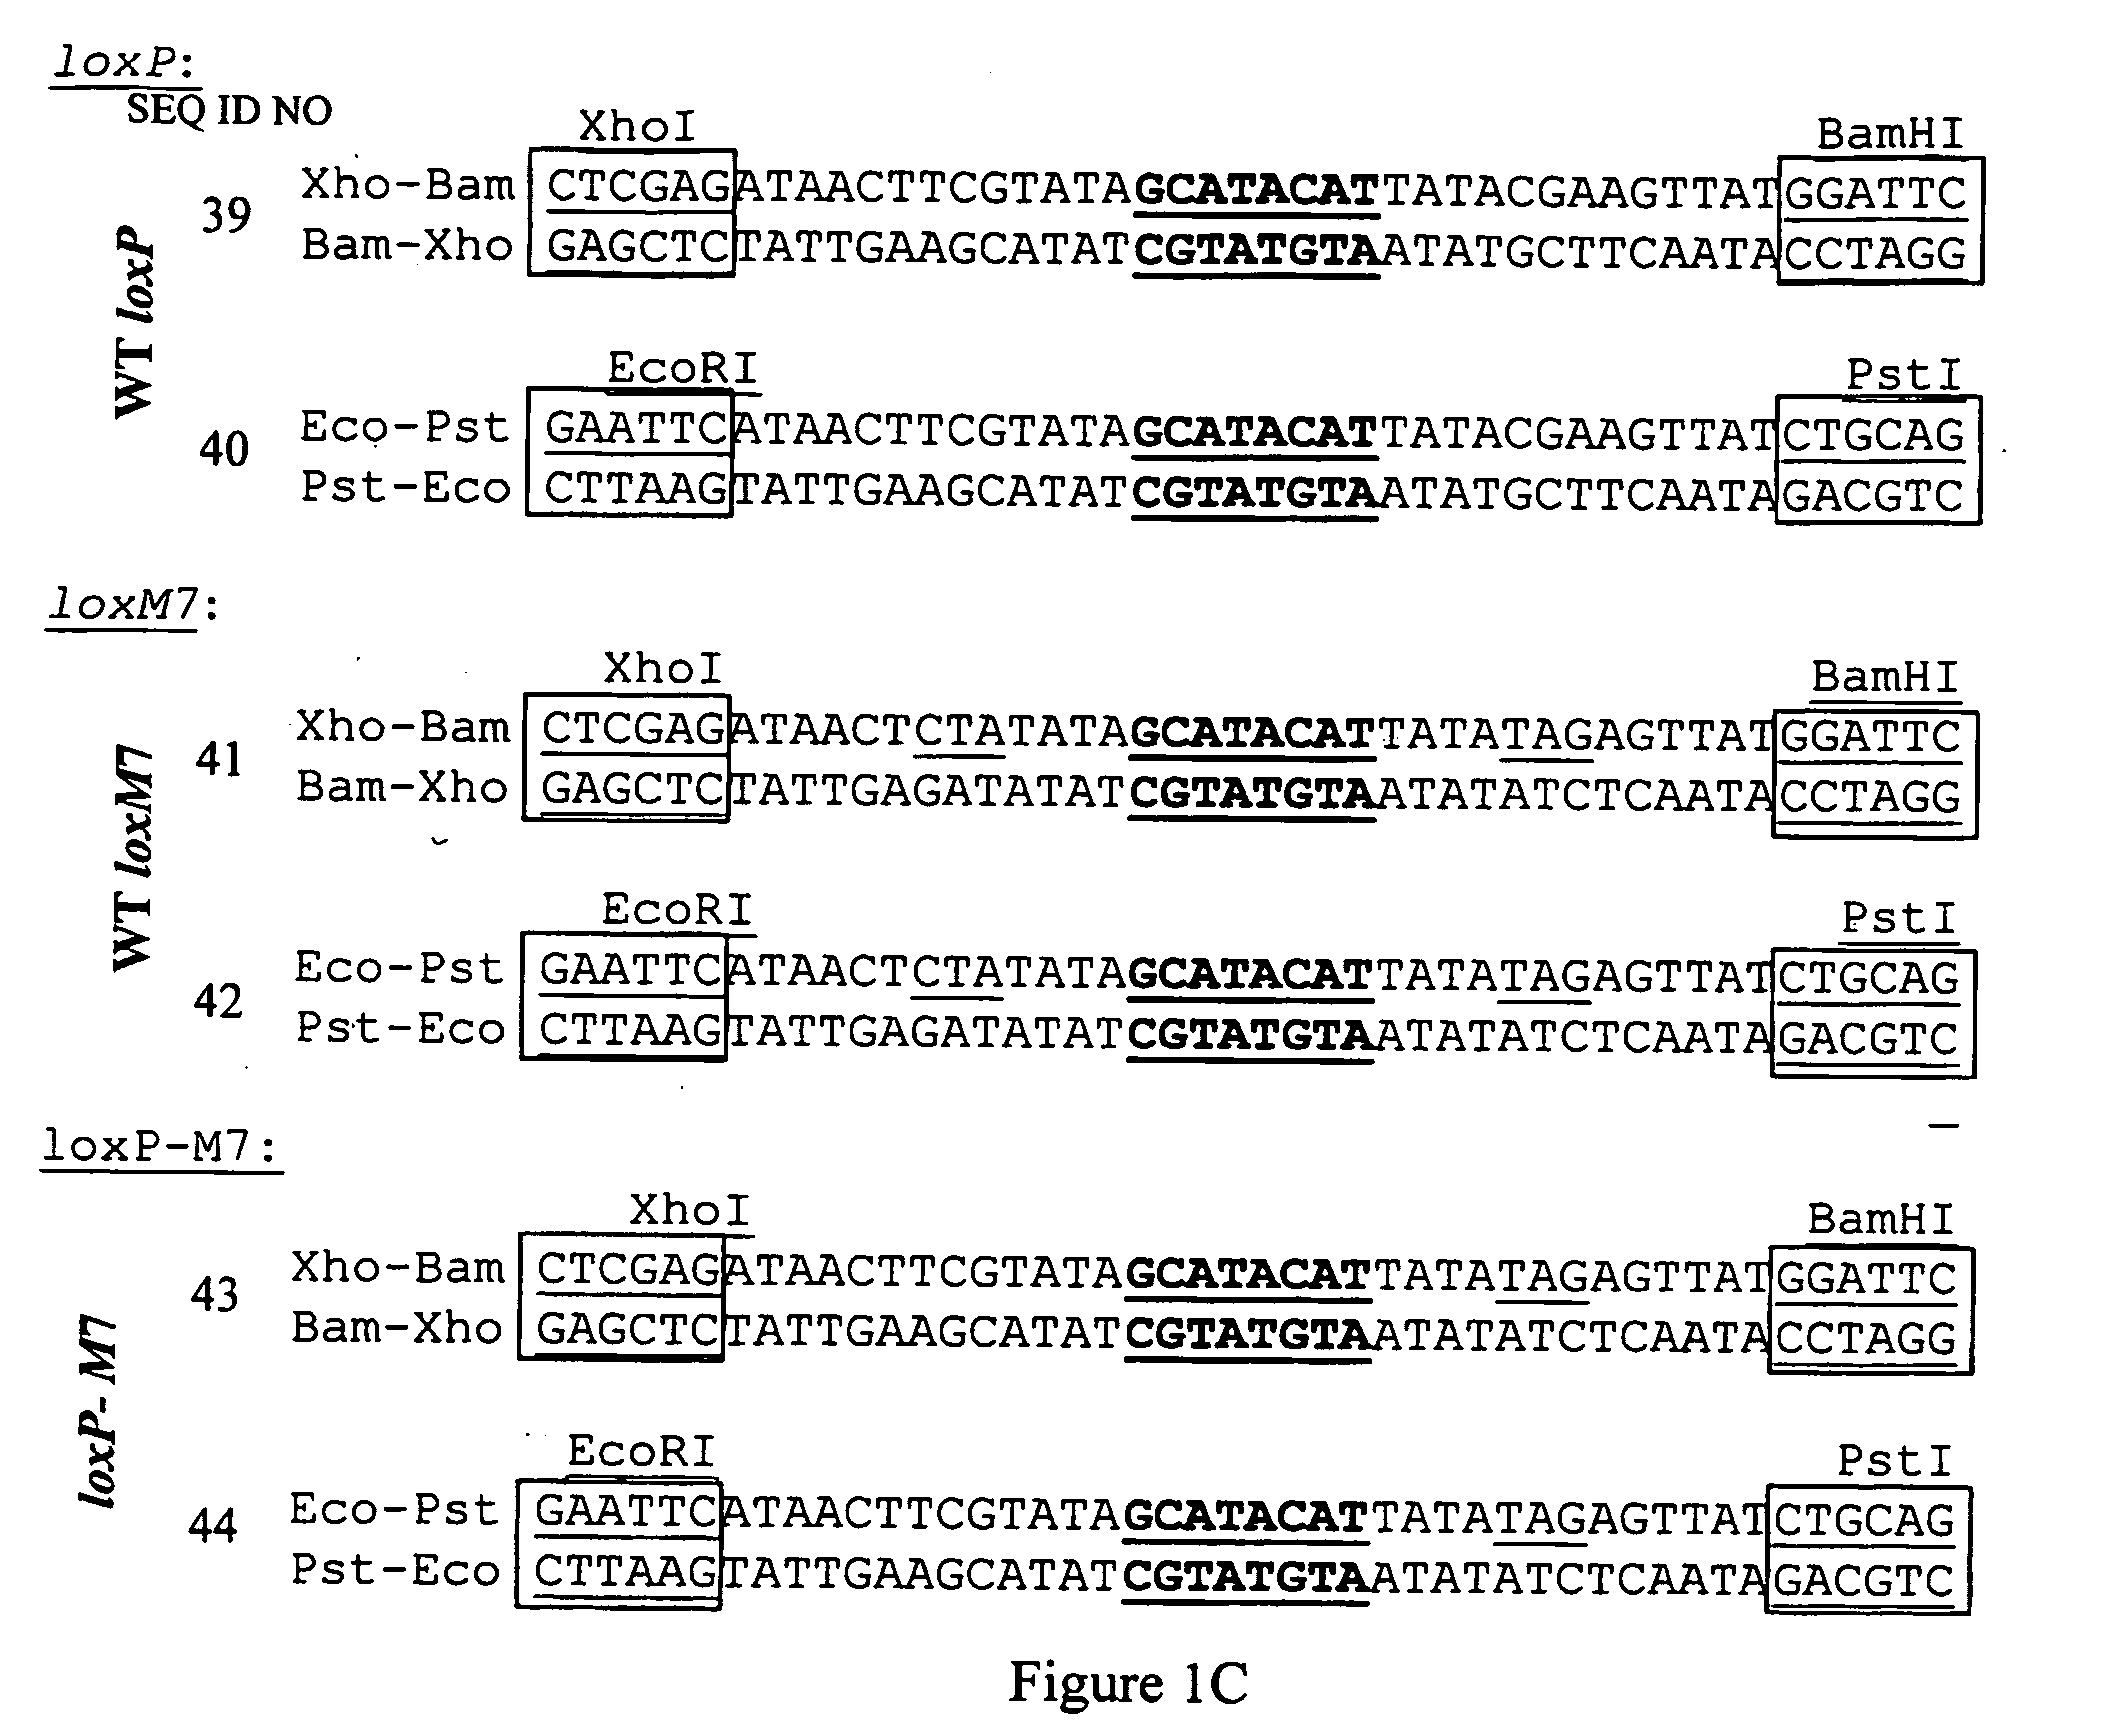 Enzymes, cells and methods for site specific recombination at asymmetric sites